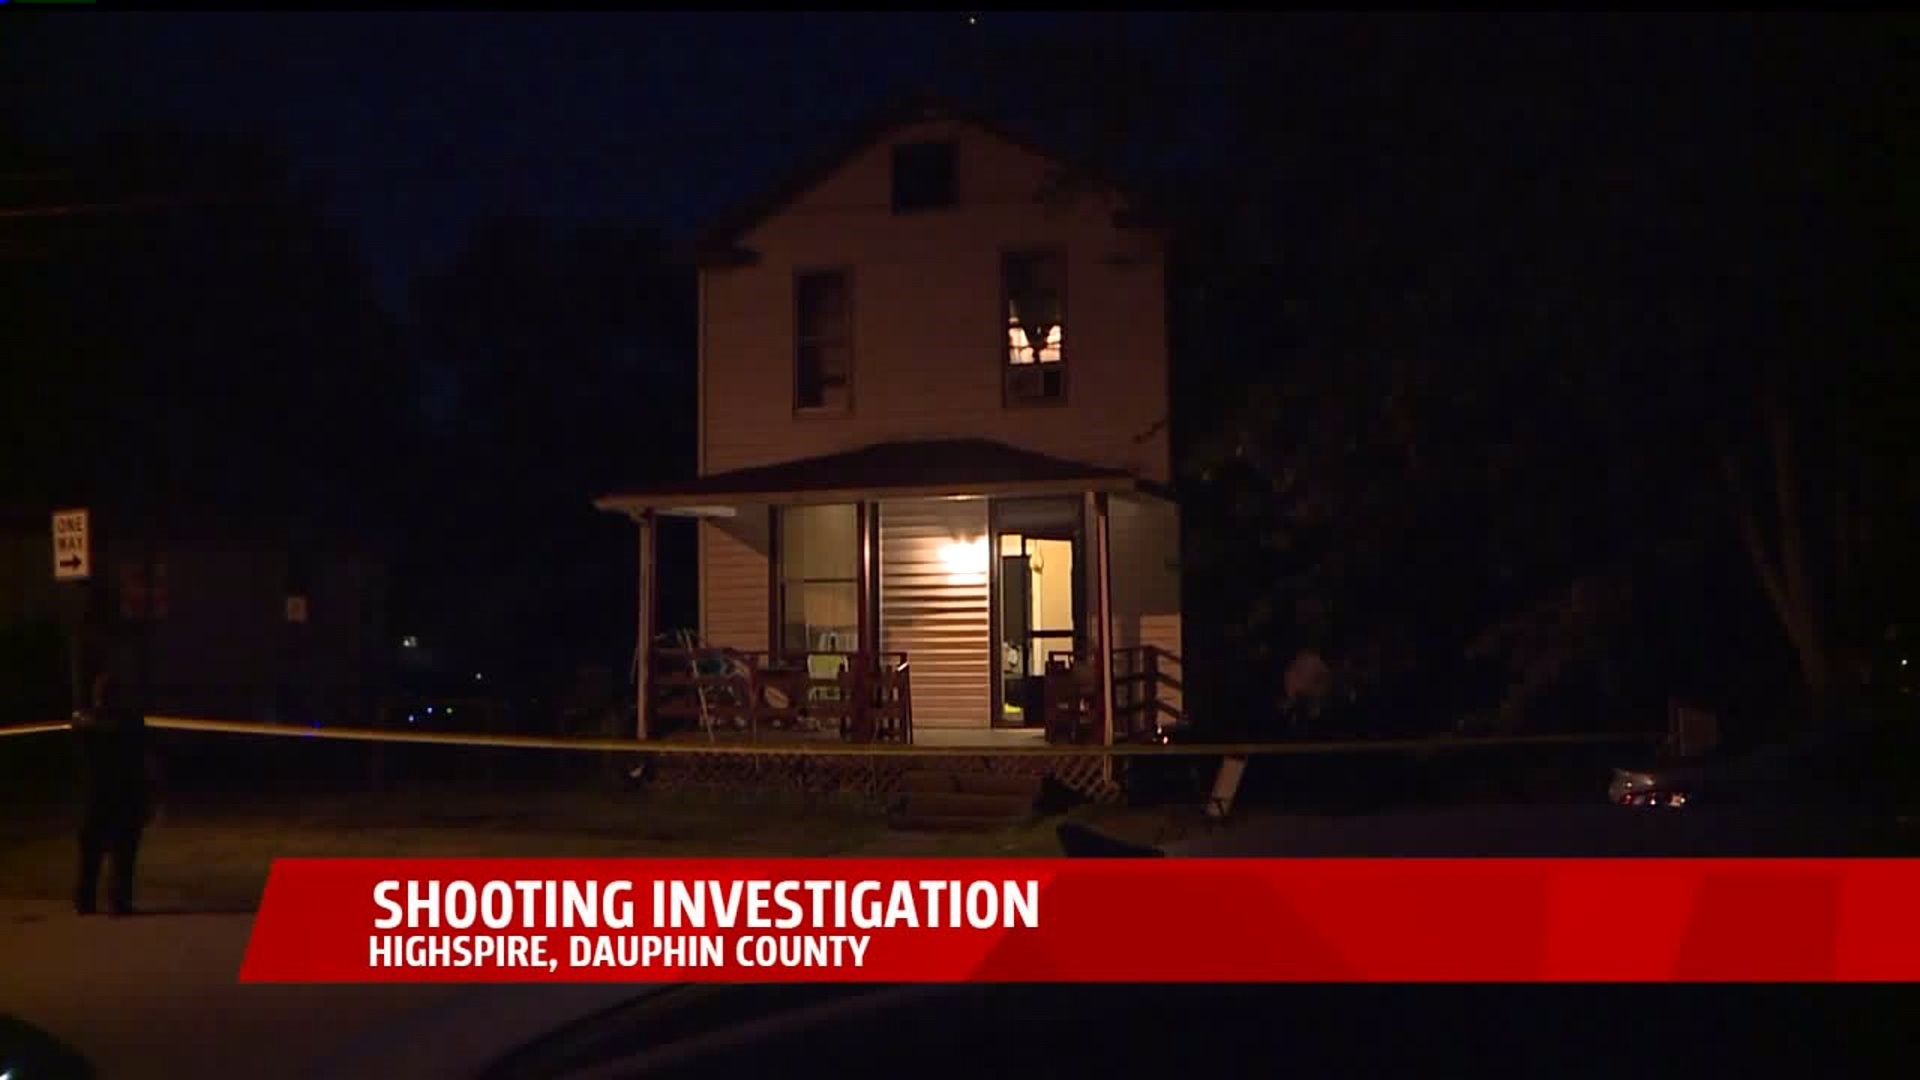 Highspire police investigating a shooting involving two juveniles